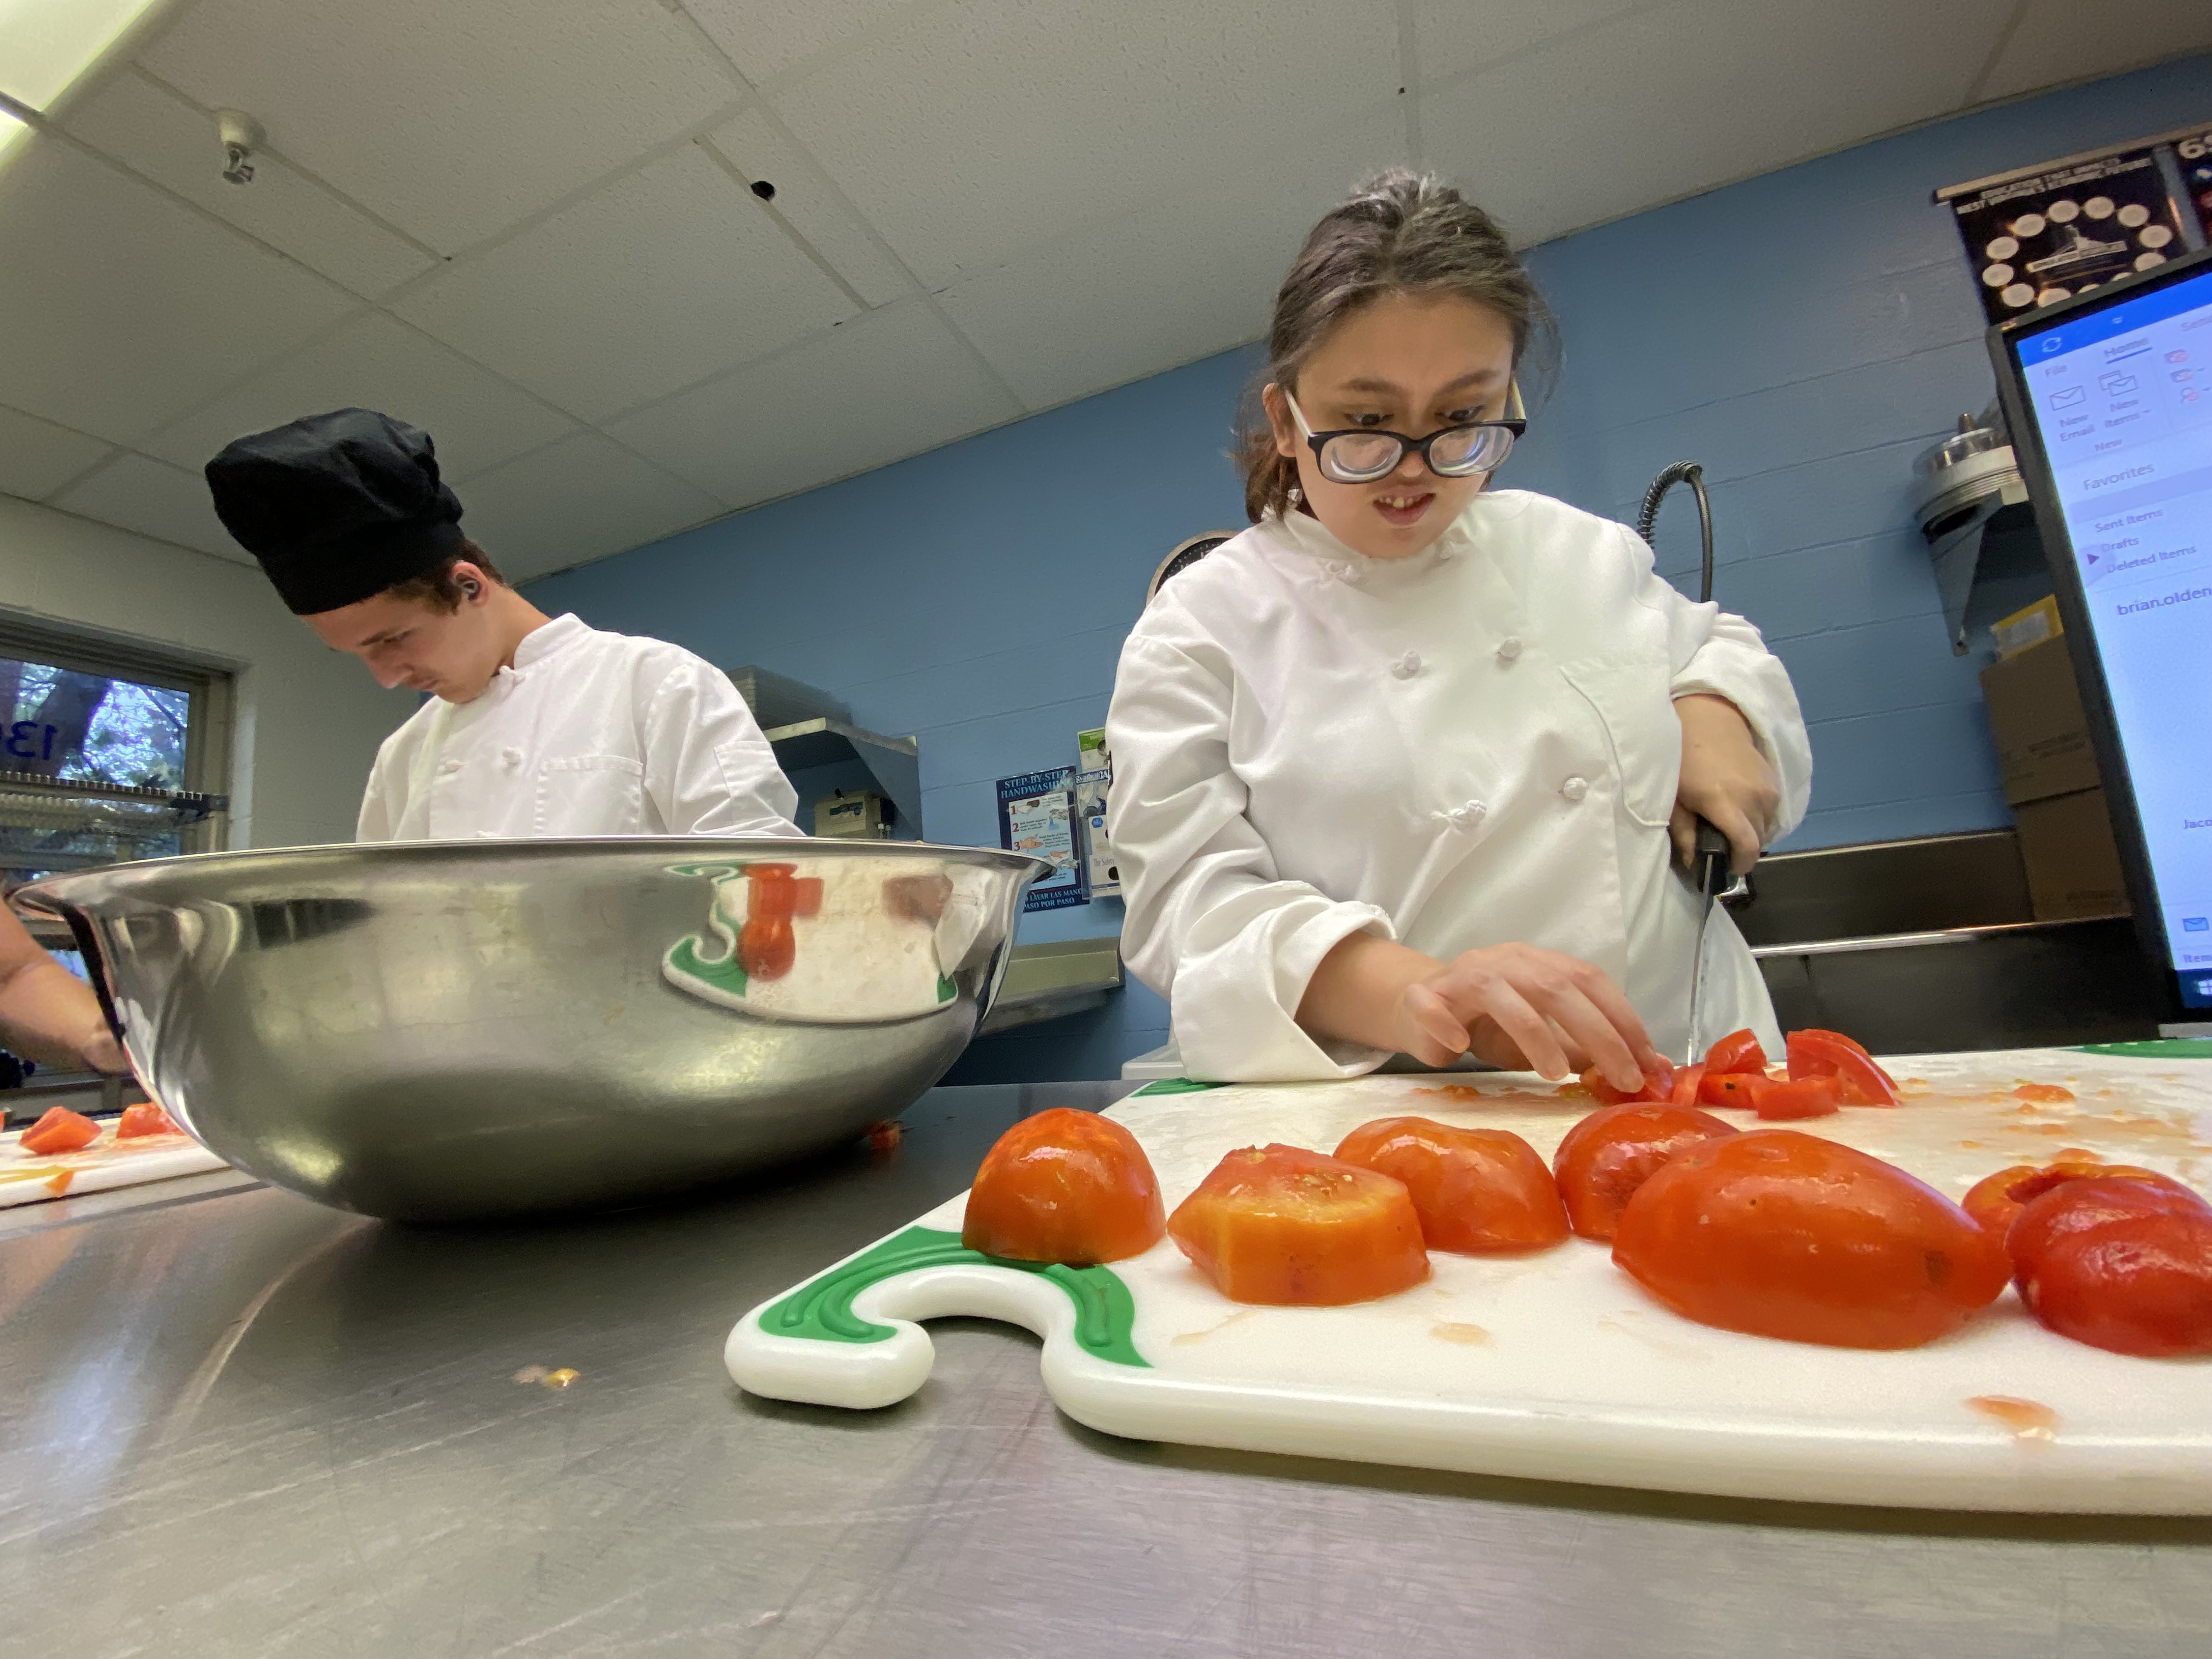 Students prepping food